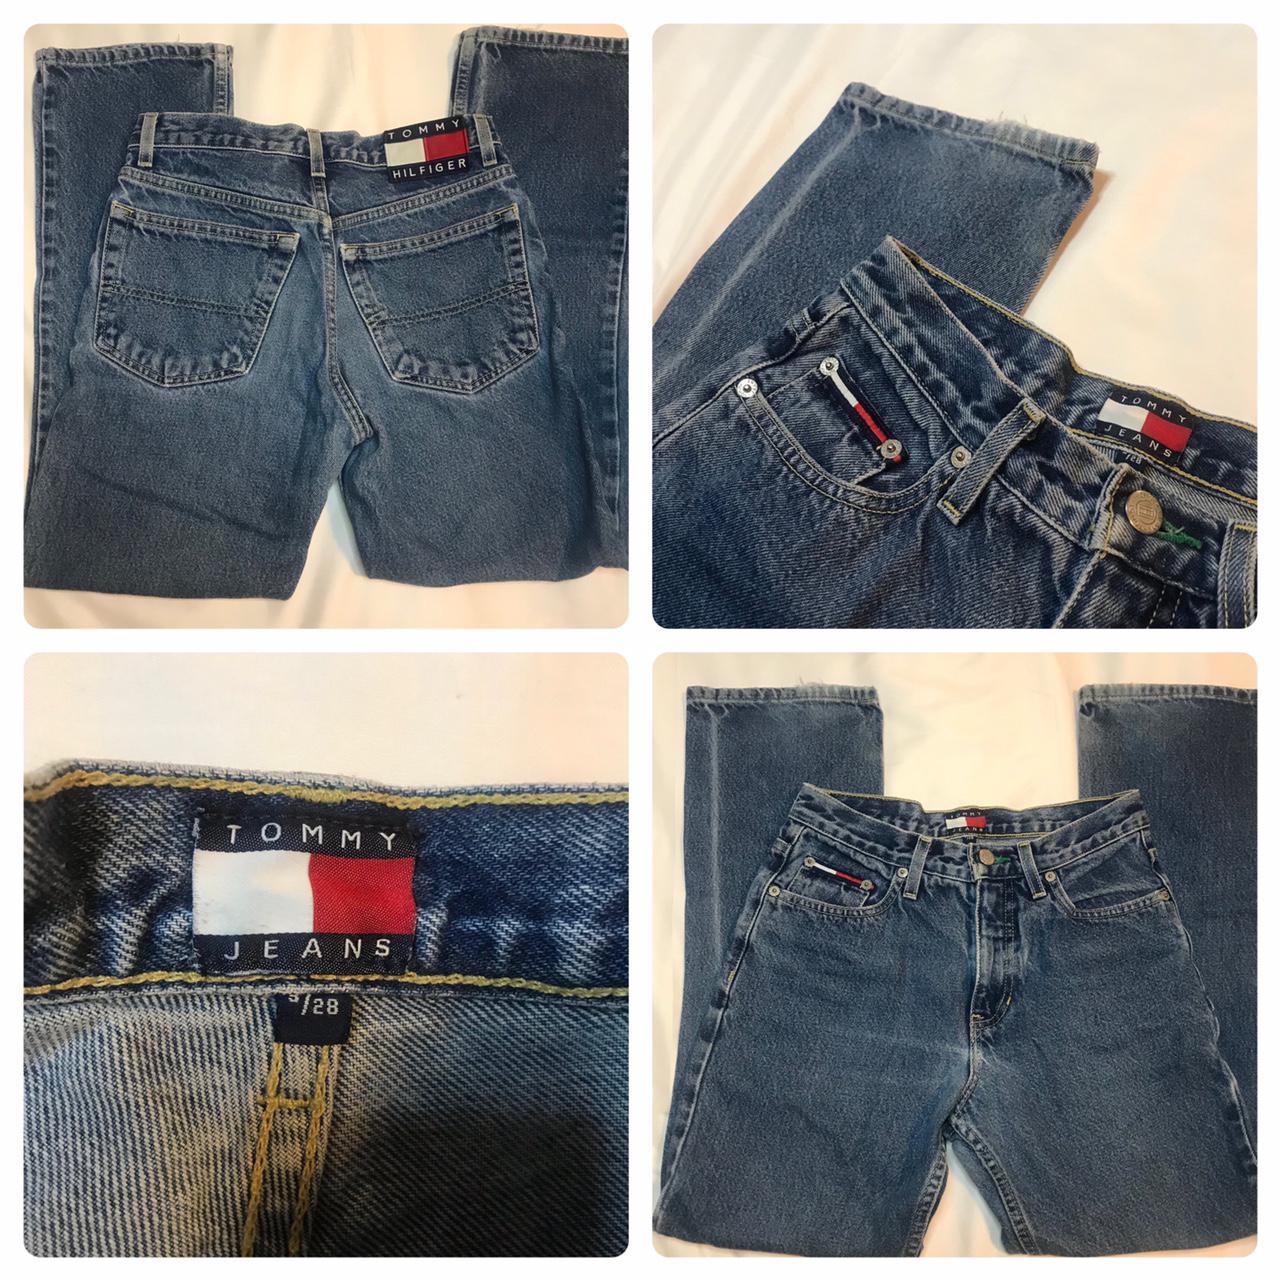 Product Image 4 - Vintage Straight Leg Jeans

Size 3/28
Brand